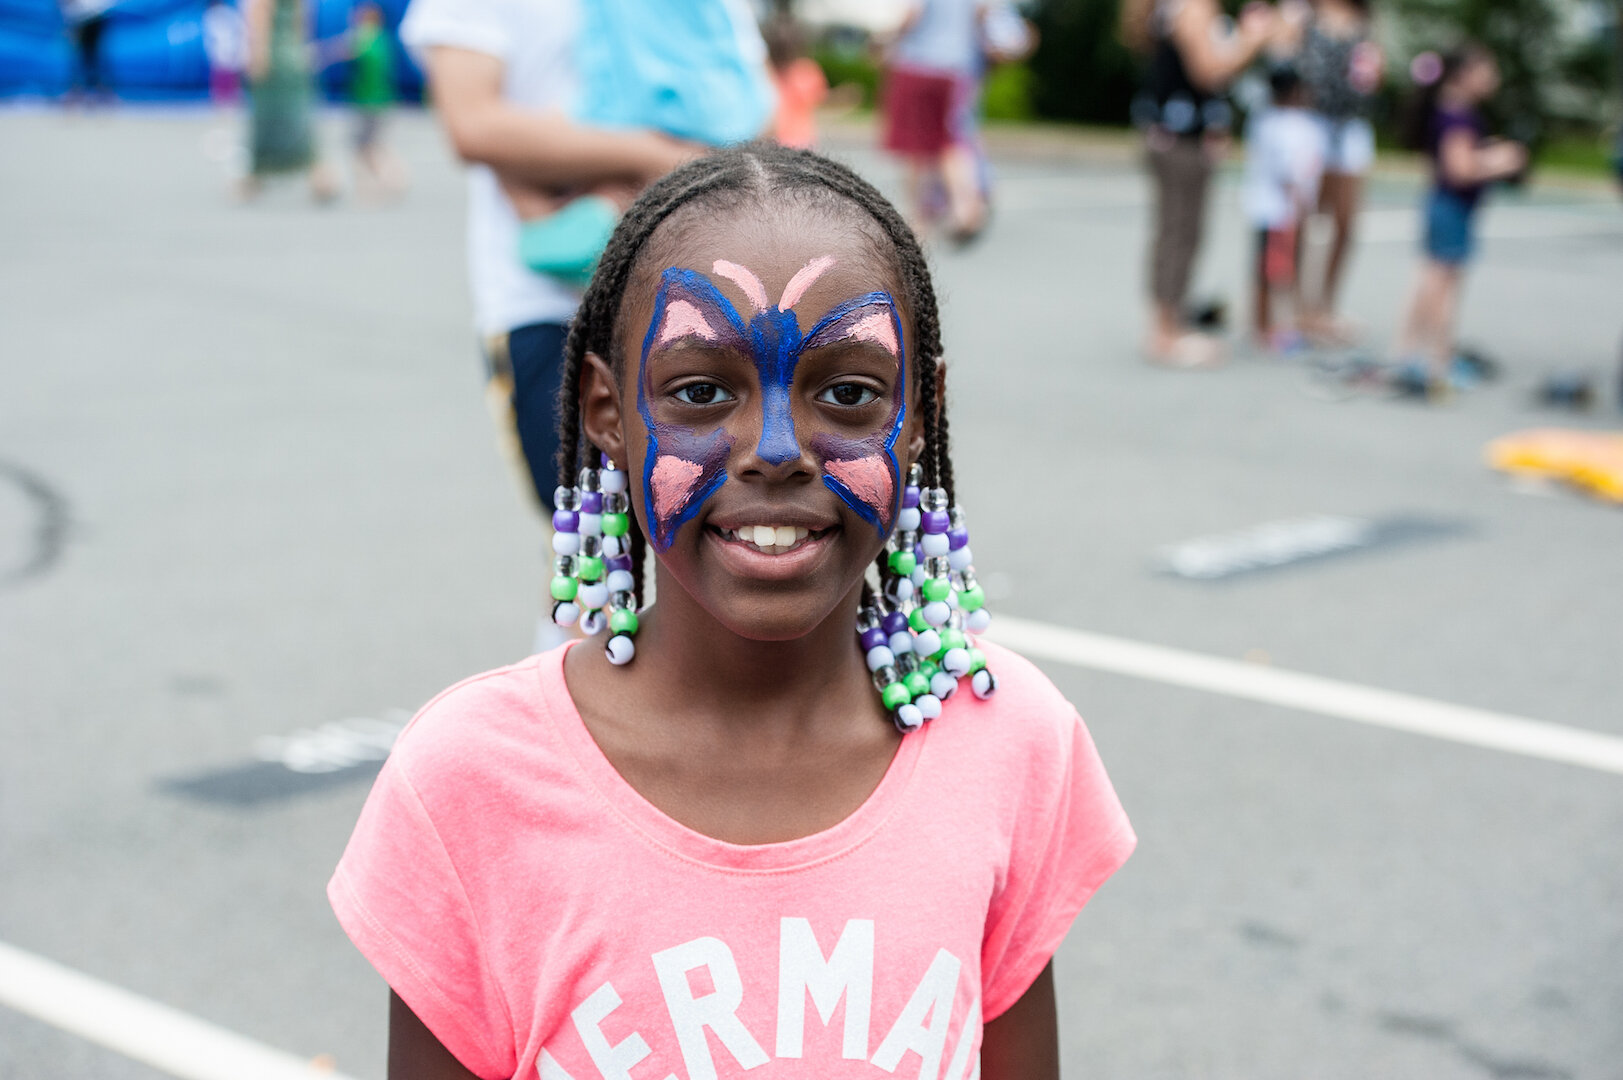  Face painting is just one fun part of community events at Ashburn Meadows. 